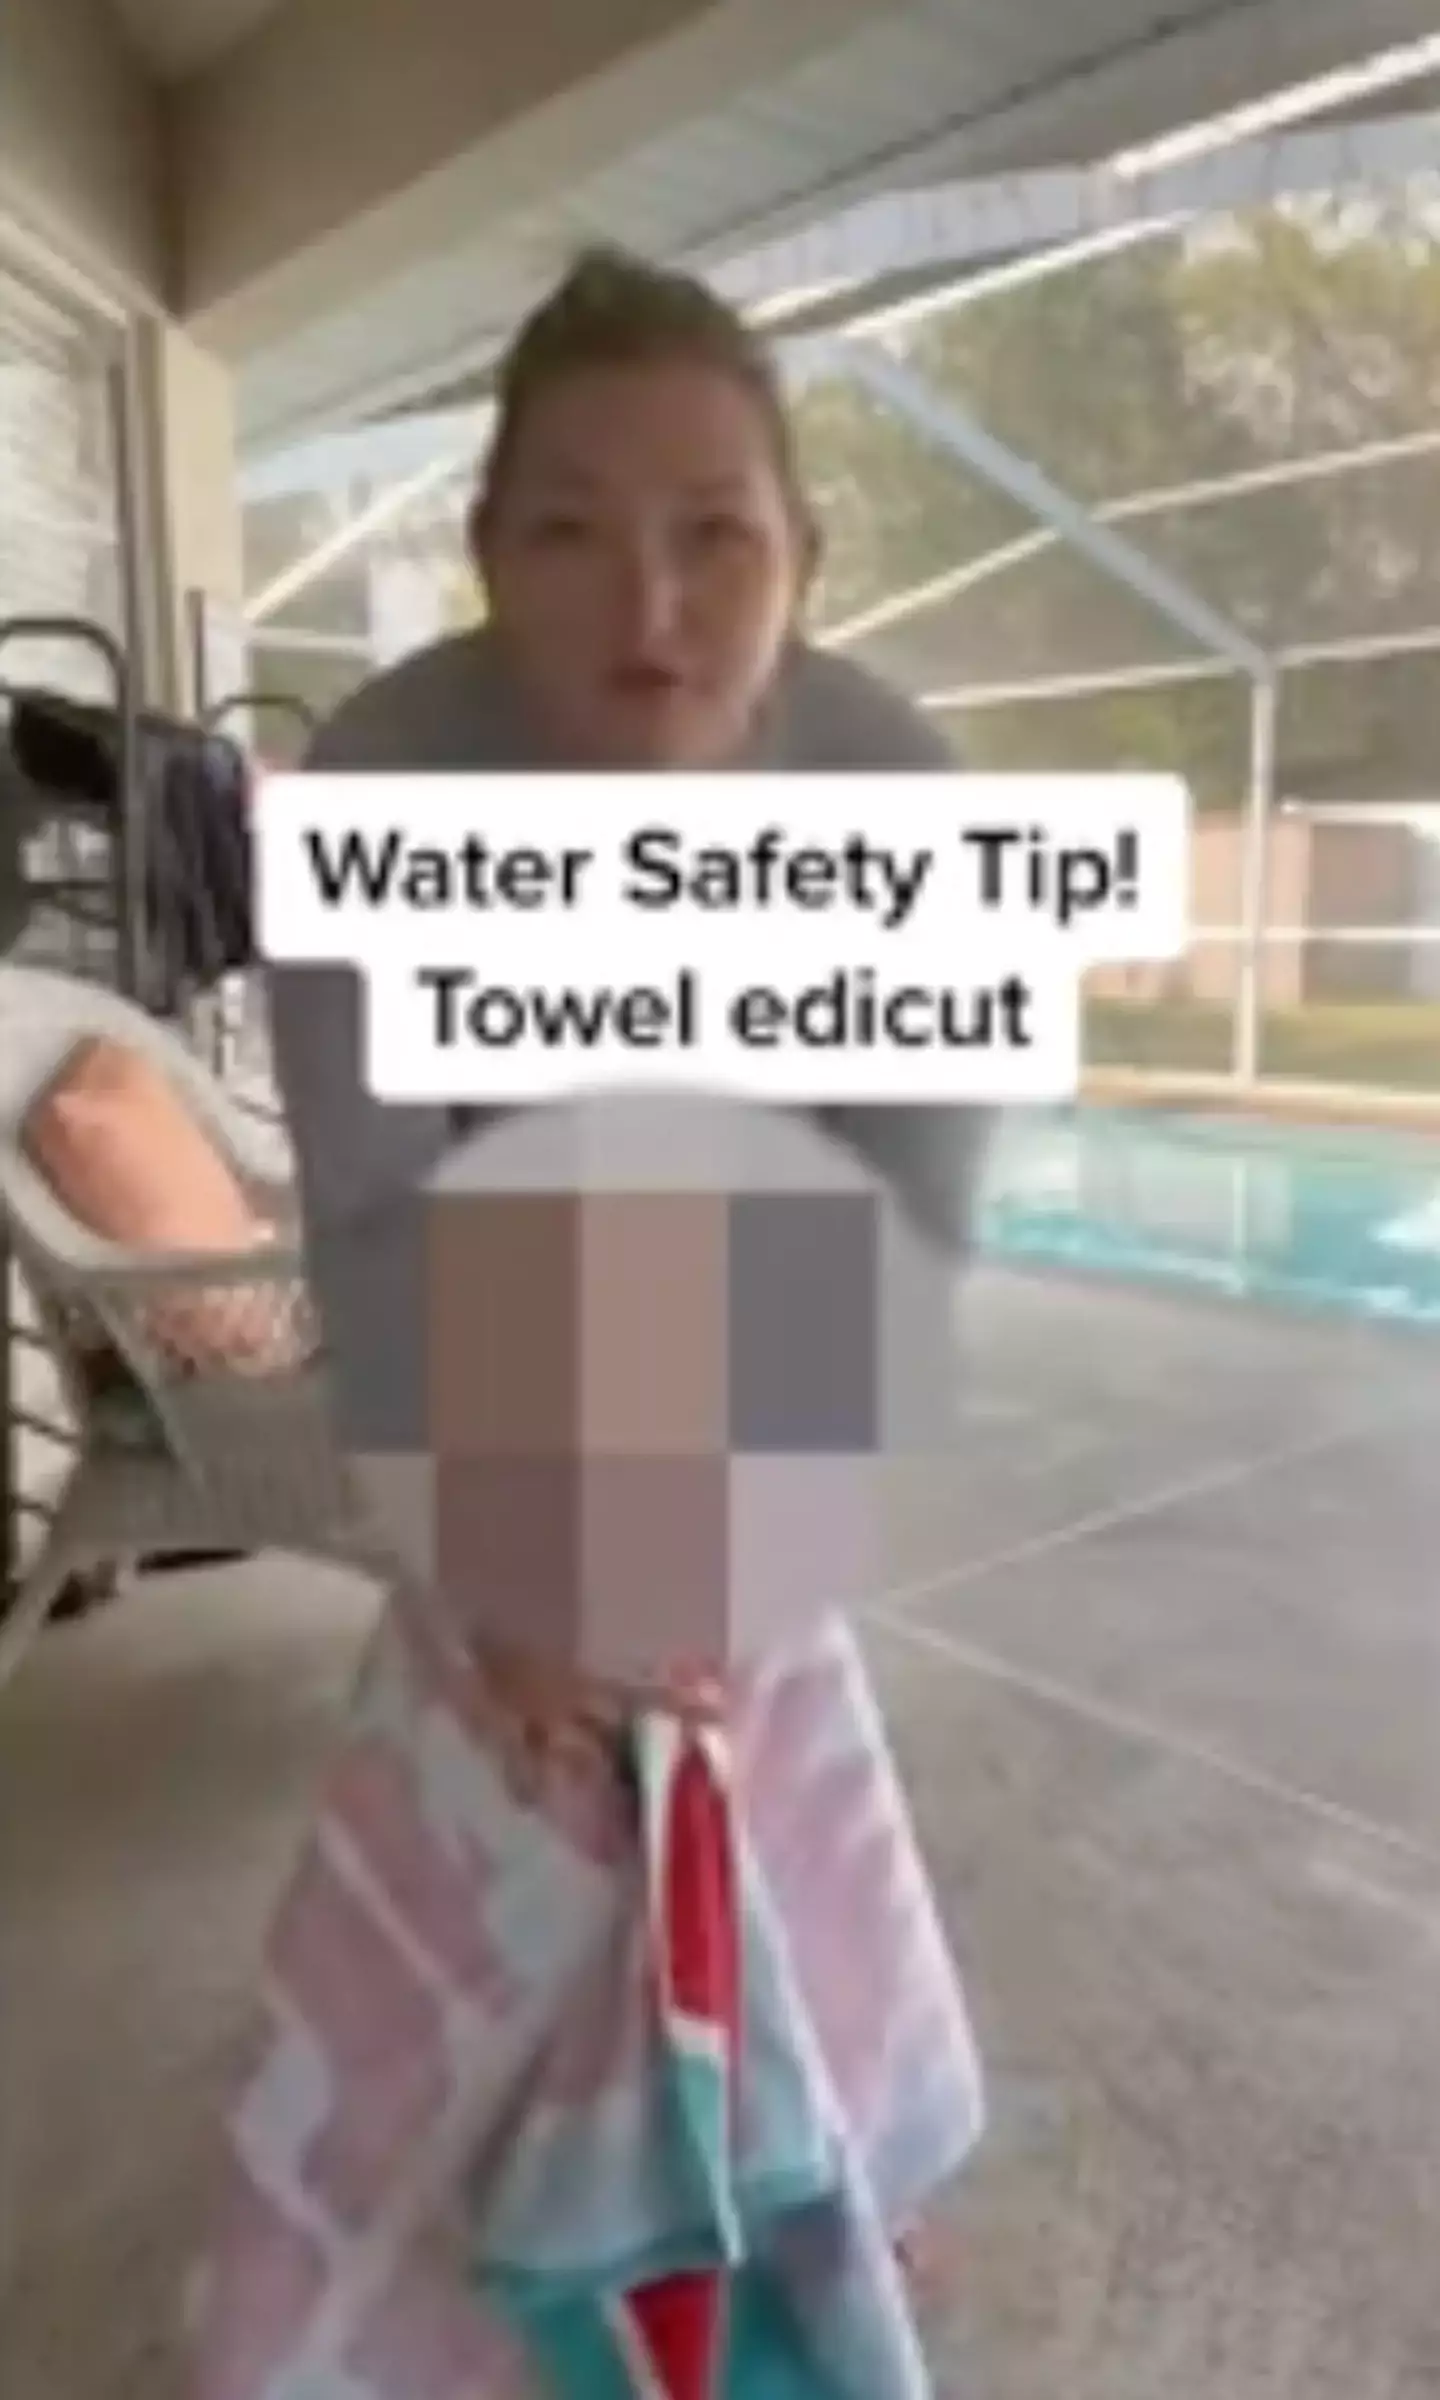 It's safer to put the towel underneath the child's arms.